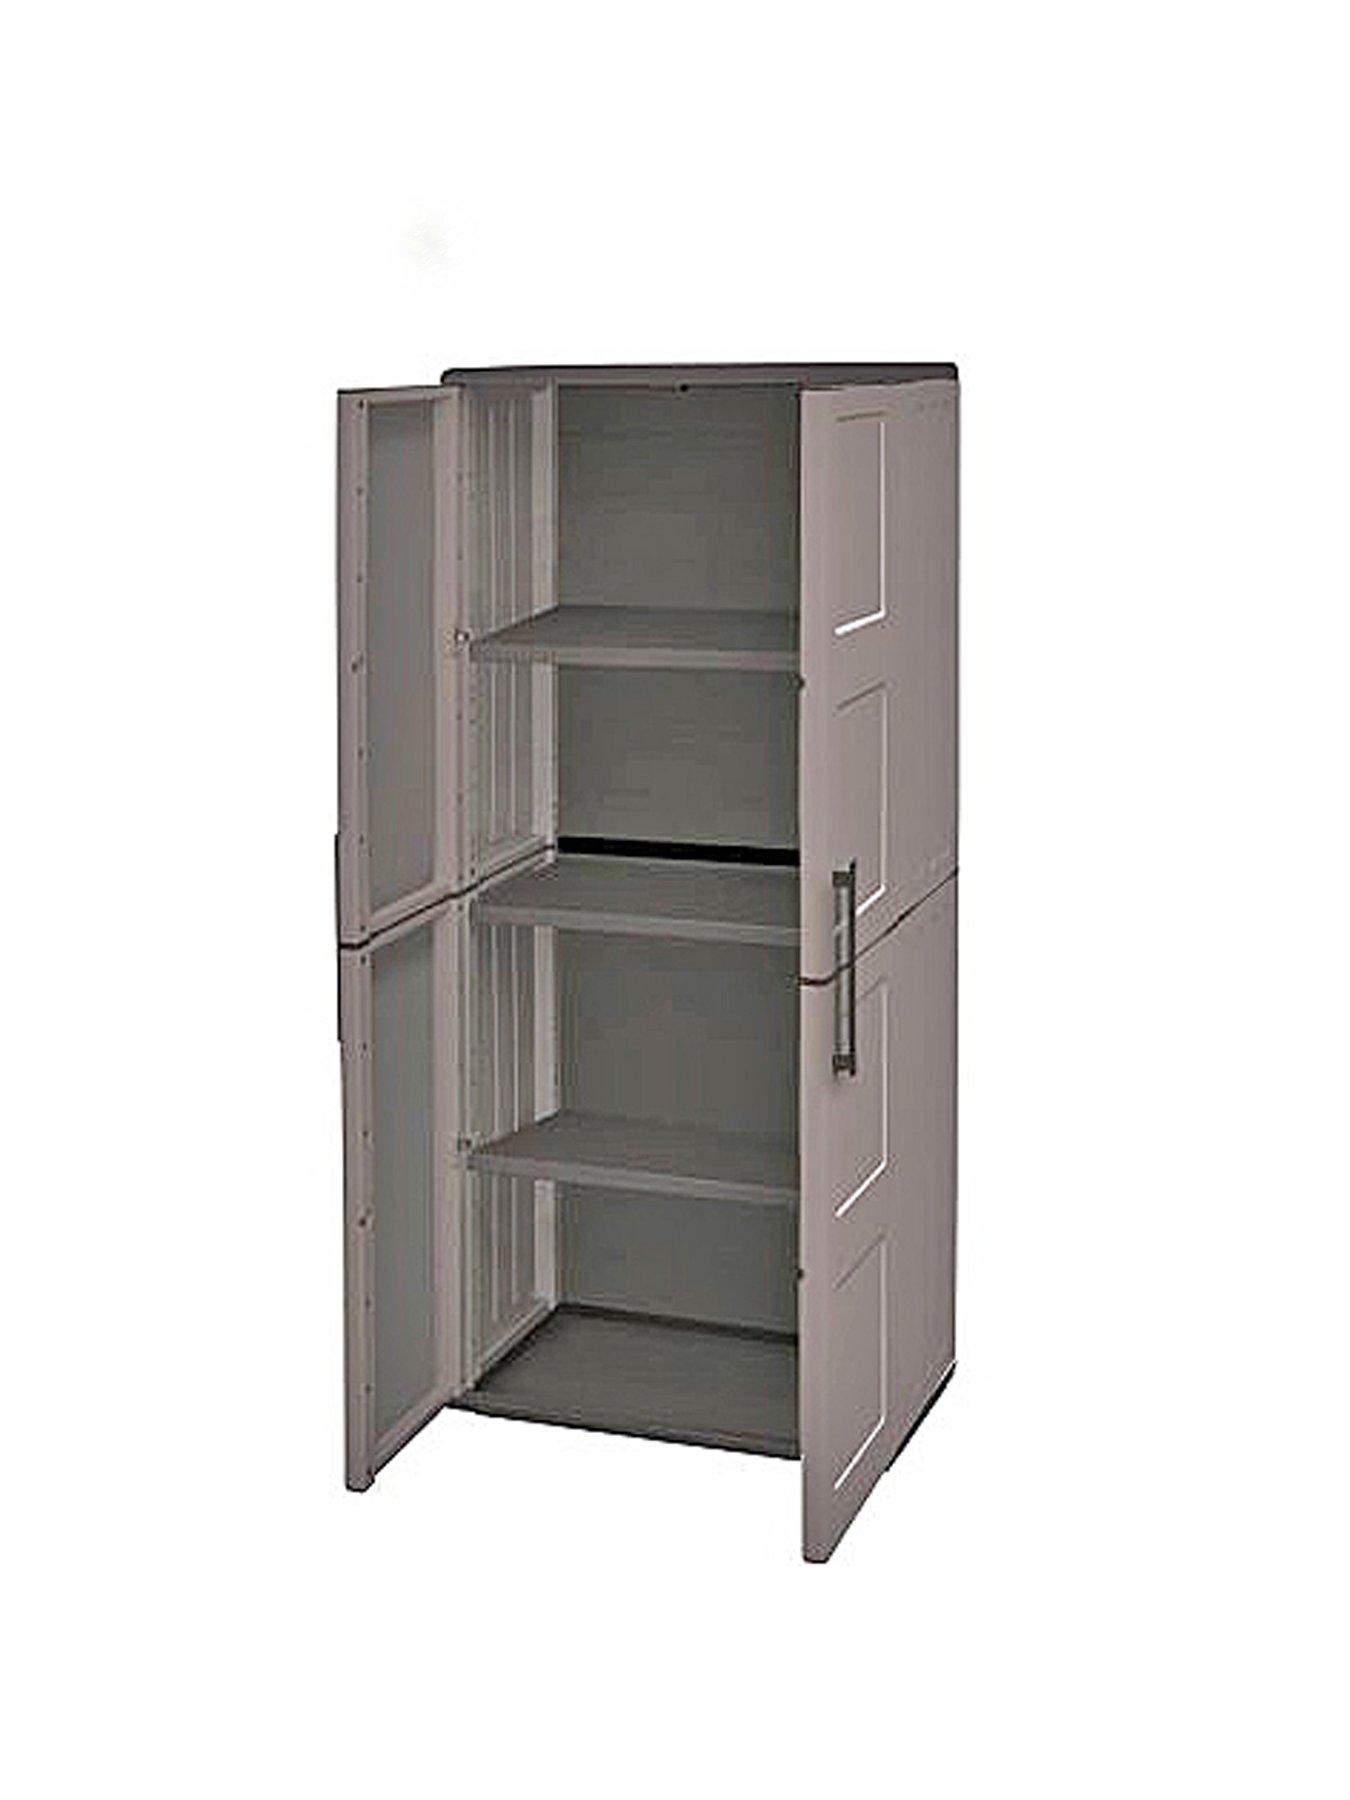 Shire Large Storage Cupboard with Shelves | littlewoods.com